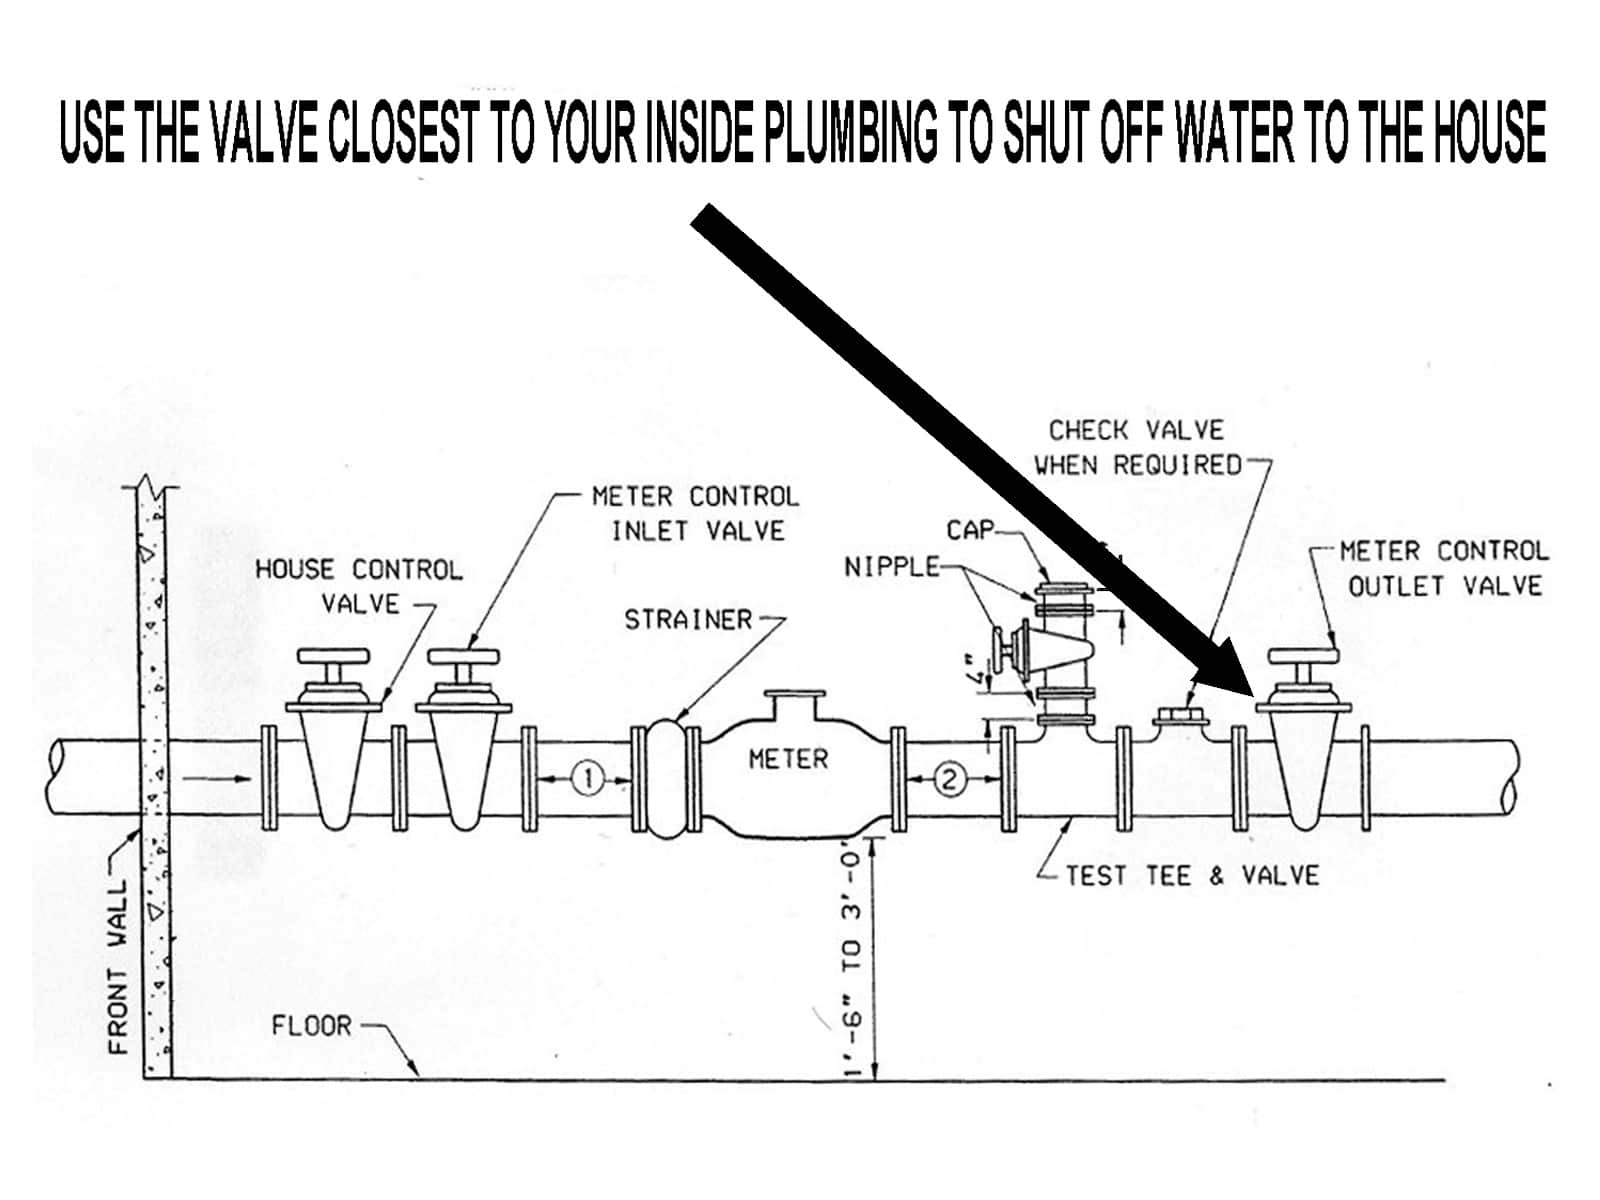 A diagram showing where is the water shut off valve located in a typical home.